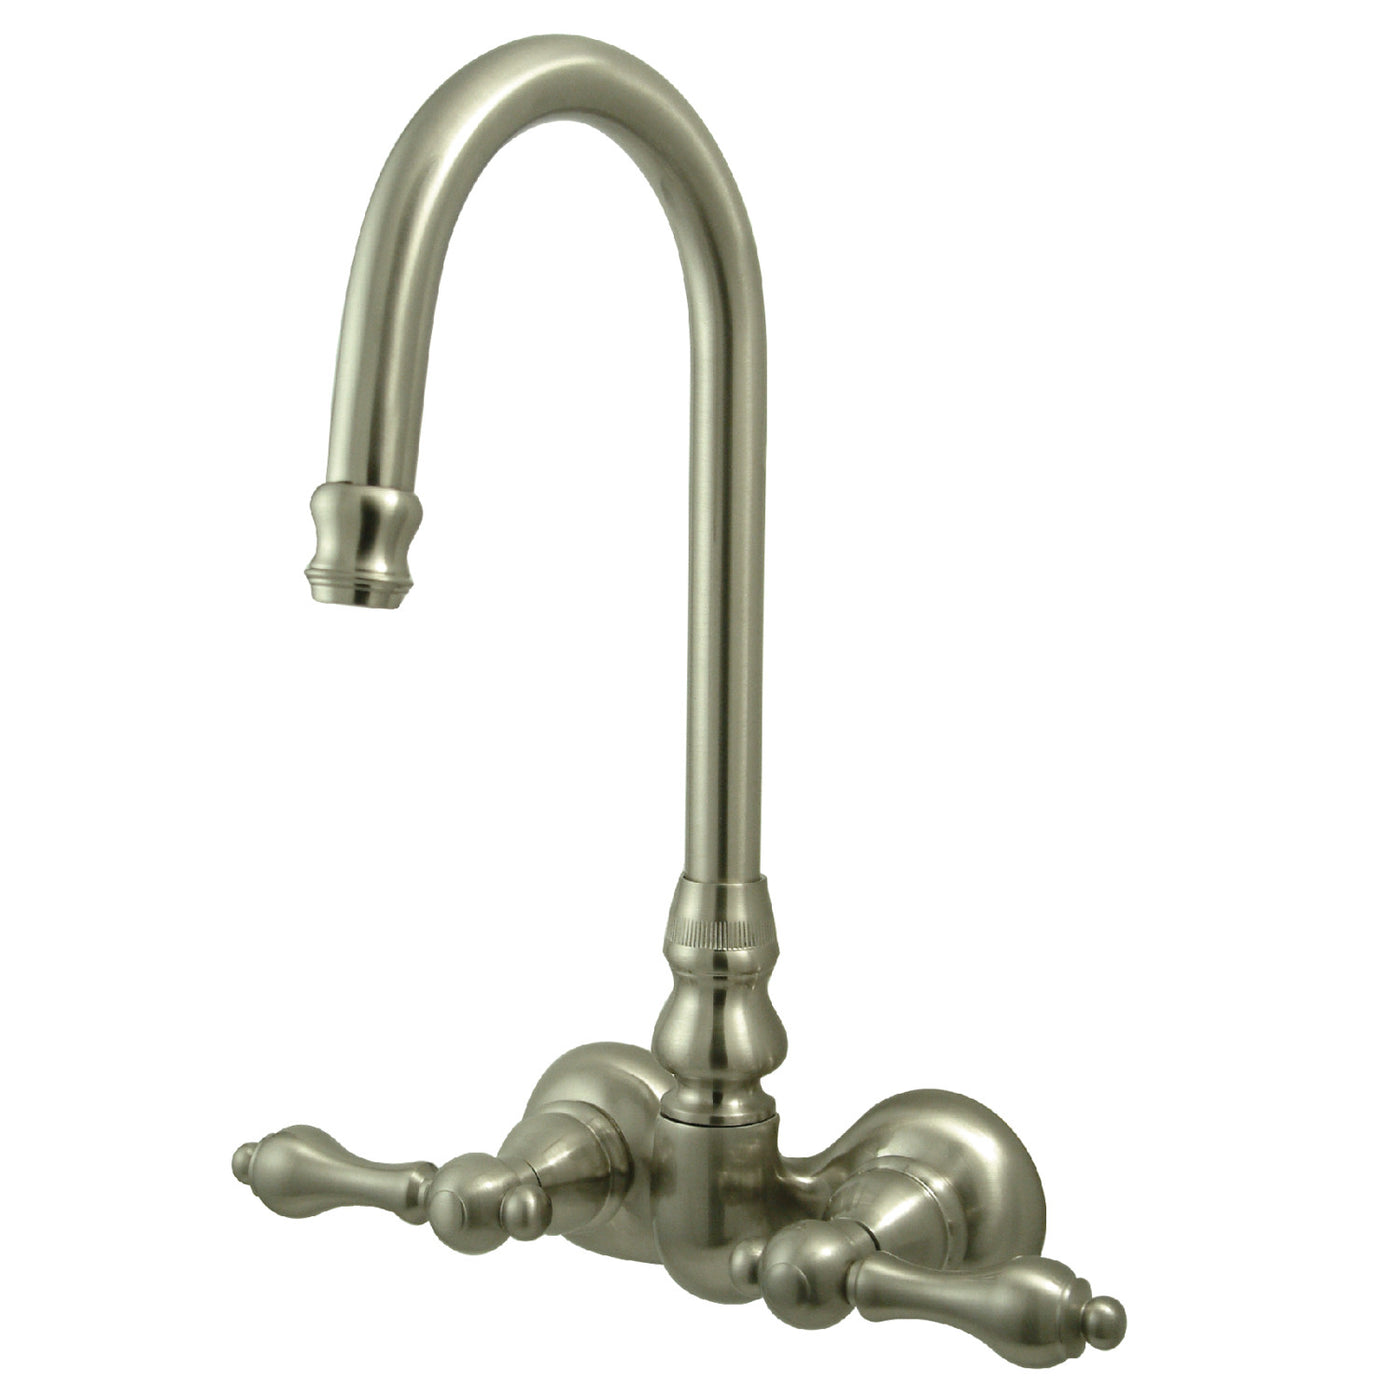 Elements of Design DT0718AL 3-3/8-Inch Wall Mount Tub Faucet, Brushed Nickel